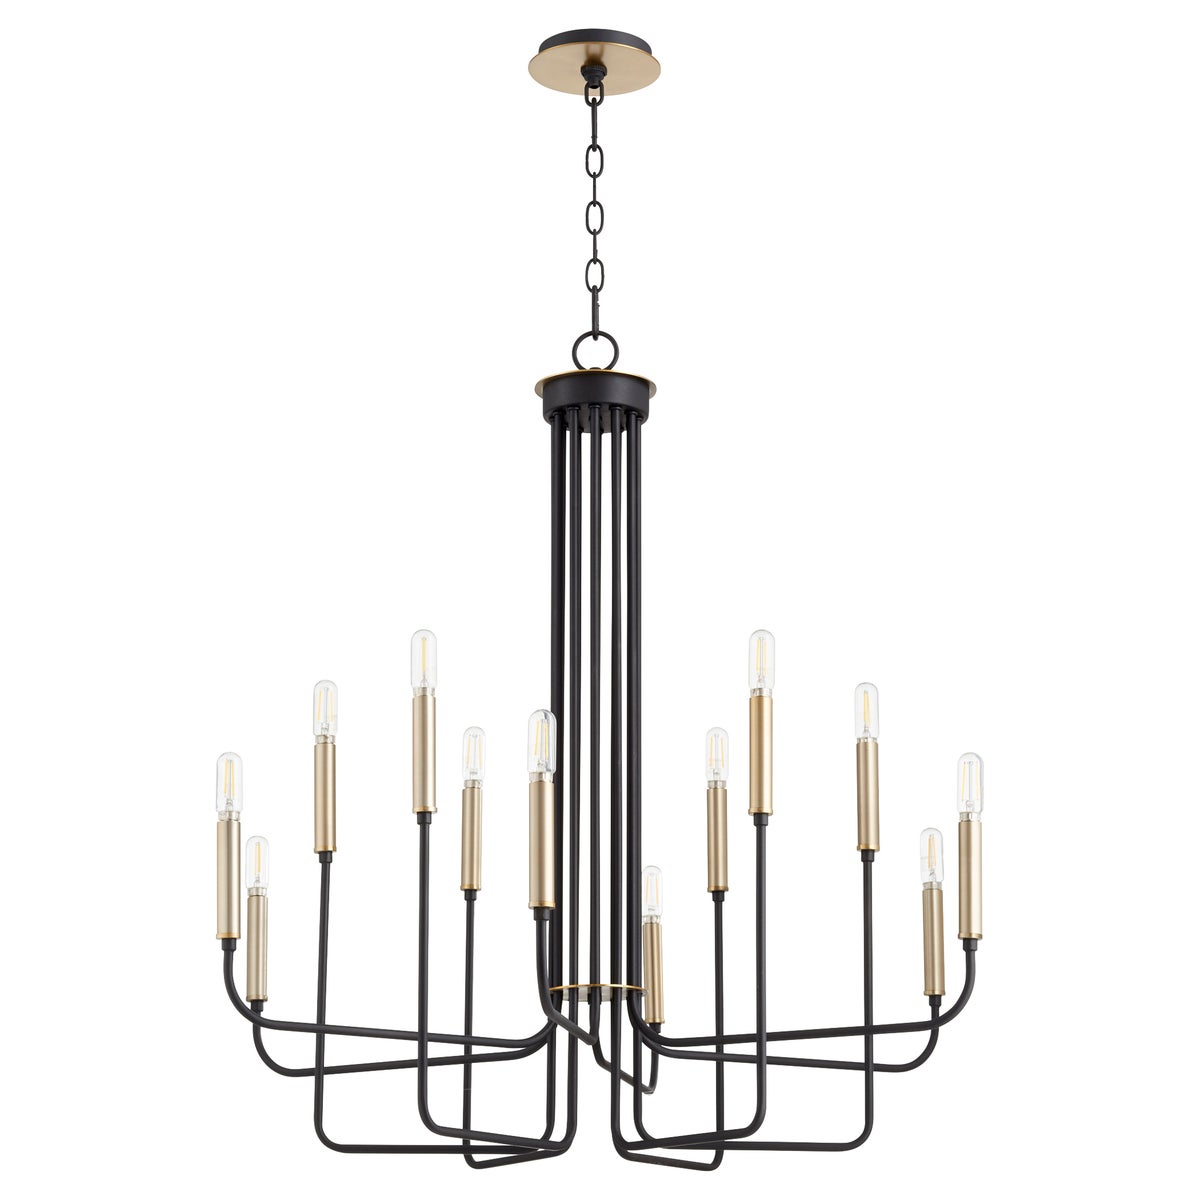 Entryway Chandelier: A minimalist, well-proportioned boxed shape with gold and black metal rods. Twelve candelabra light sources emit an ambient glow. Suitable for modern-industrial or minimalist-loft ensembles. Indoor/outdoor use, UL Listed for damp locations.